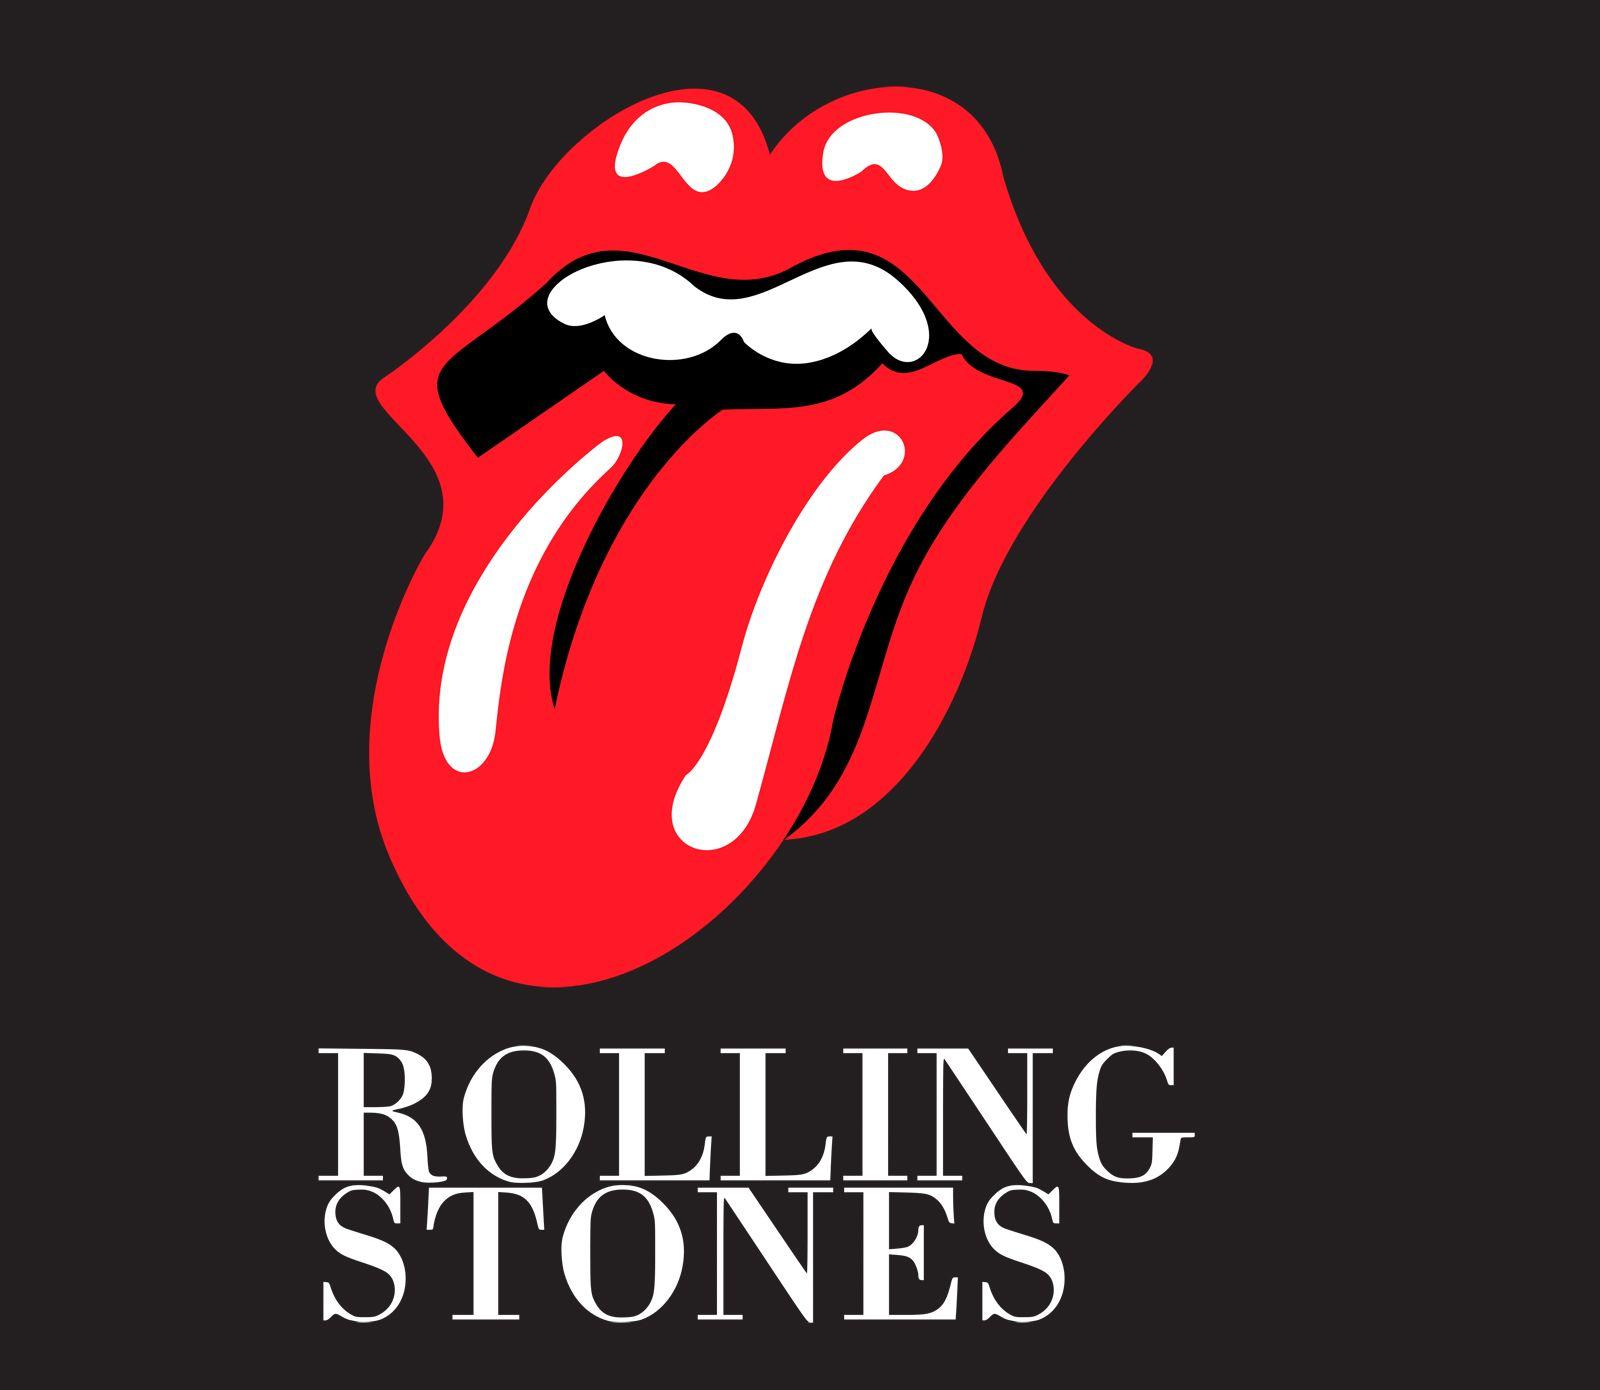 Rolling Stone Logo - Rolling Stones Logo, Rolling Stones Symbol, Meaning, History and ...